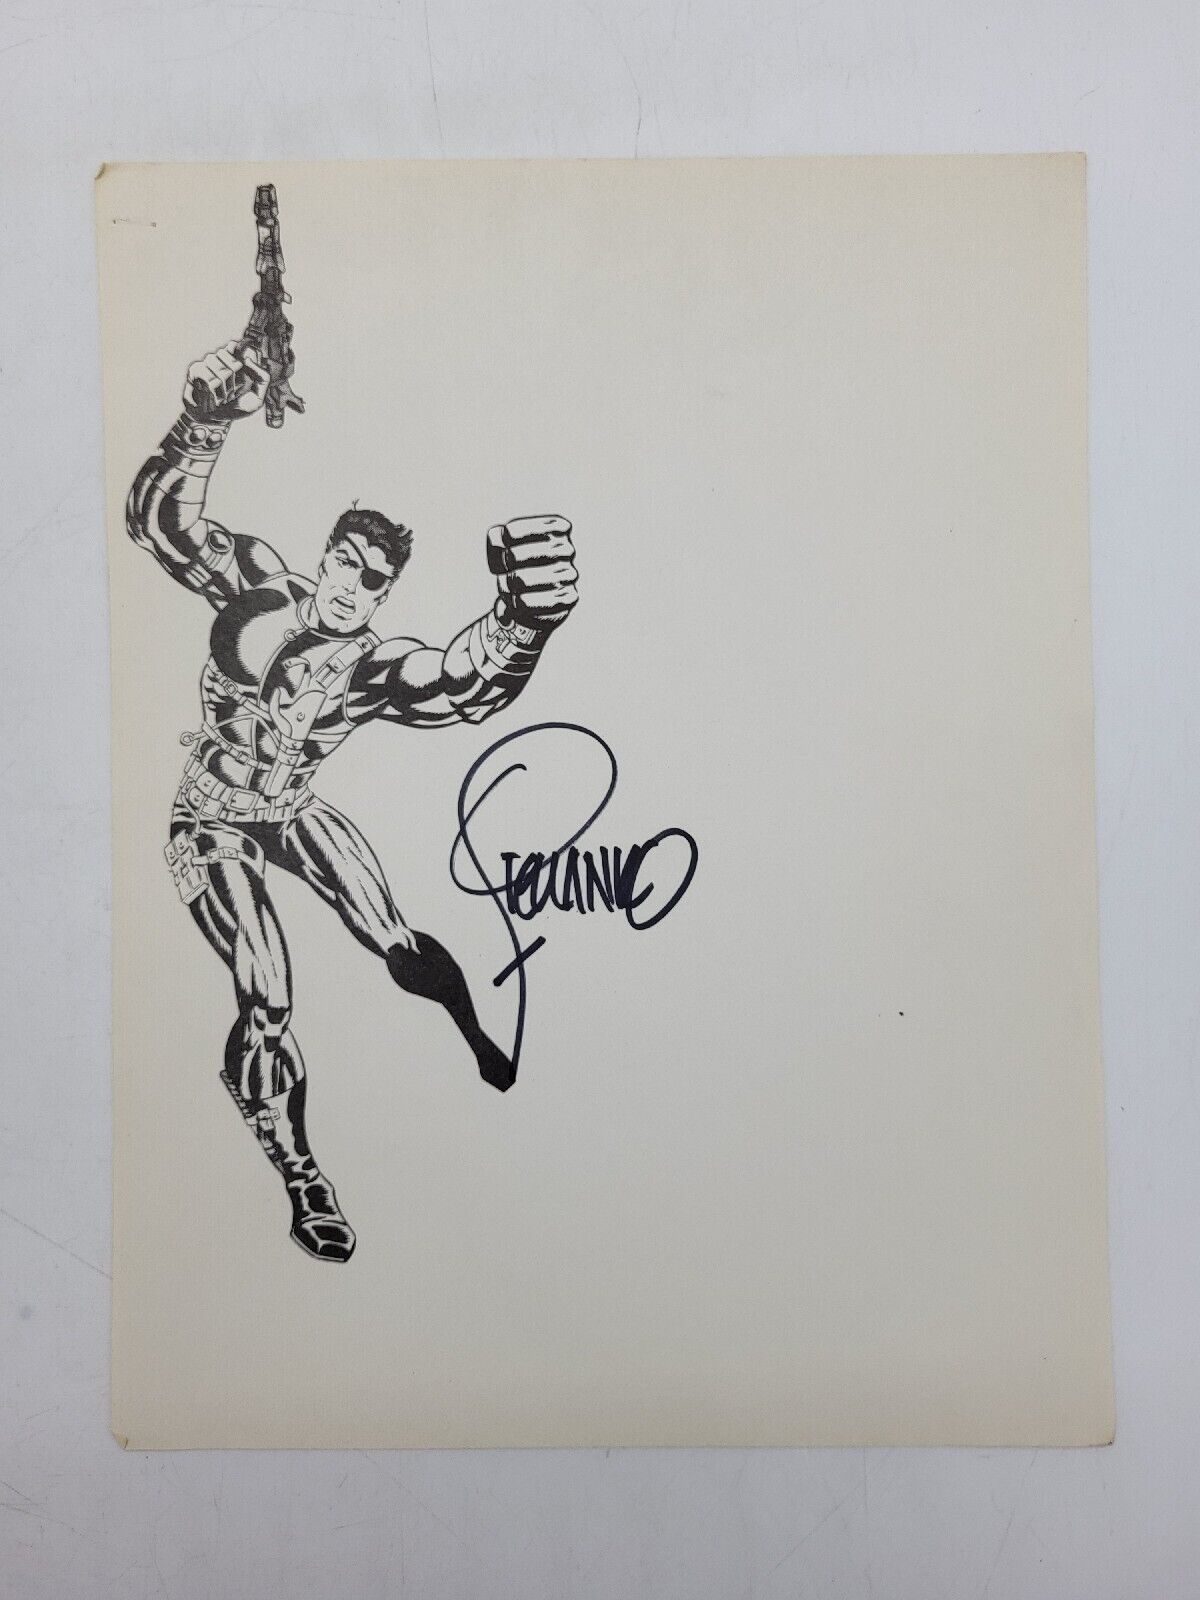 Vtg Marvel Mania Stationery Ca. 1969 14 Sheets Total, 1 SIGNED by Jim Steranko